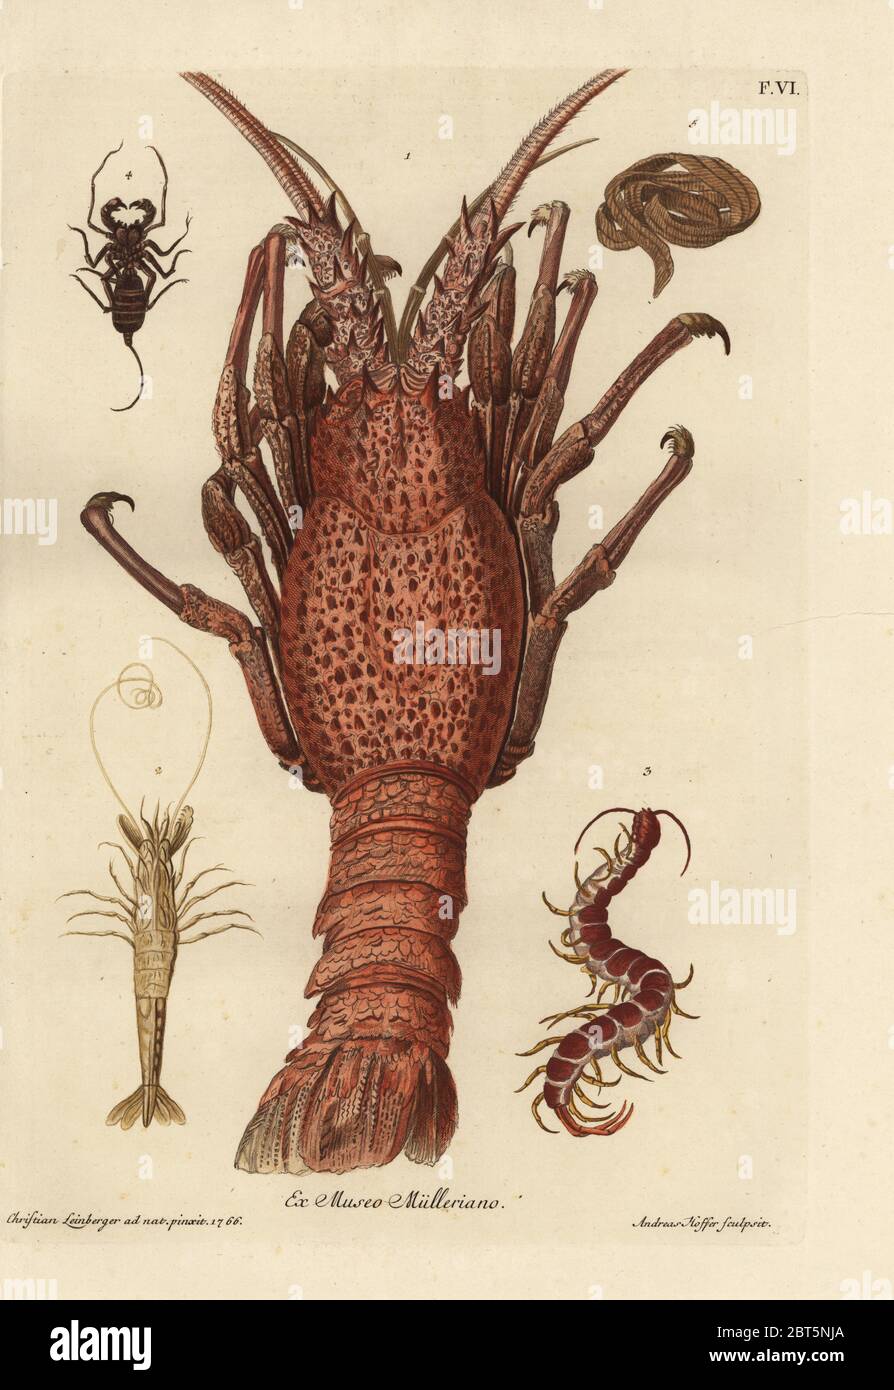 Lobster, Homarus gammarus 1, shrimp species 2, giant centipede, Scolopendra gigantea 3, unknown insect, Pinnoter 4, and tapeworm, Taenia species 5. Handcoloured copperplate engraving by Andreas Hoffer after an illustration by Christian Leinberger from Georg Wolfgang Knorr's Deliciae Naturae Selectae of Kabinet van Zeldzaamheden der Natuur, Blusse and Son, Nuremberg, 1771. Specimens from a Wunderkammer or Cabinet of Curiosities of P.L. Muller. Stock Photo